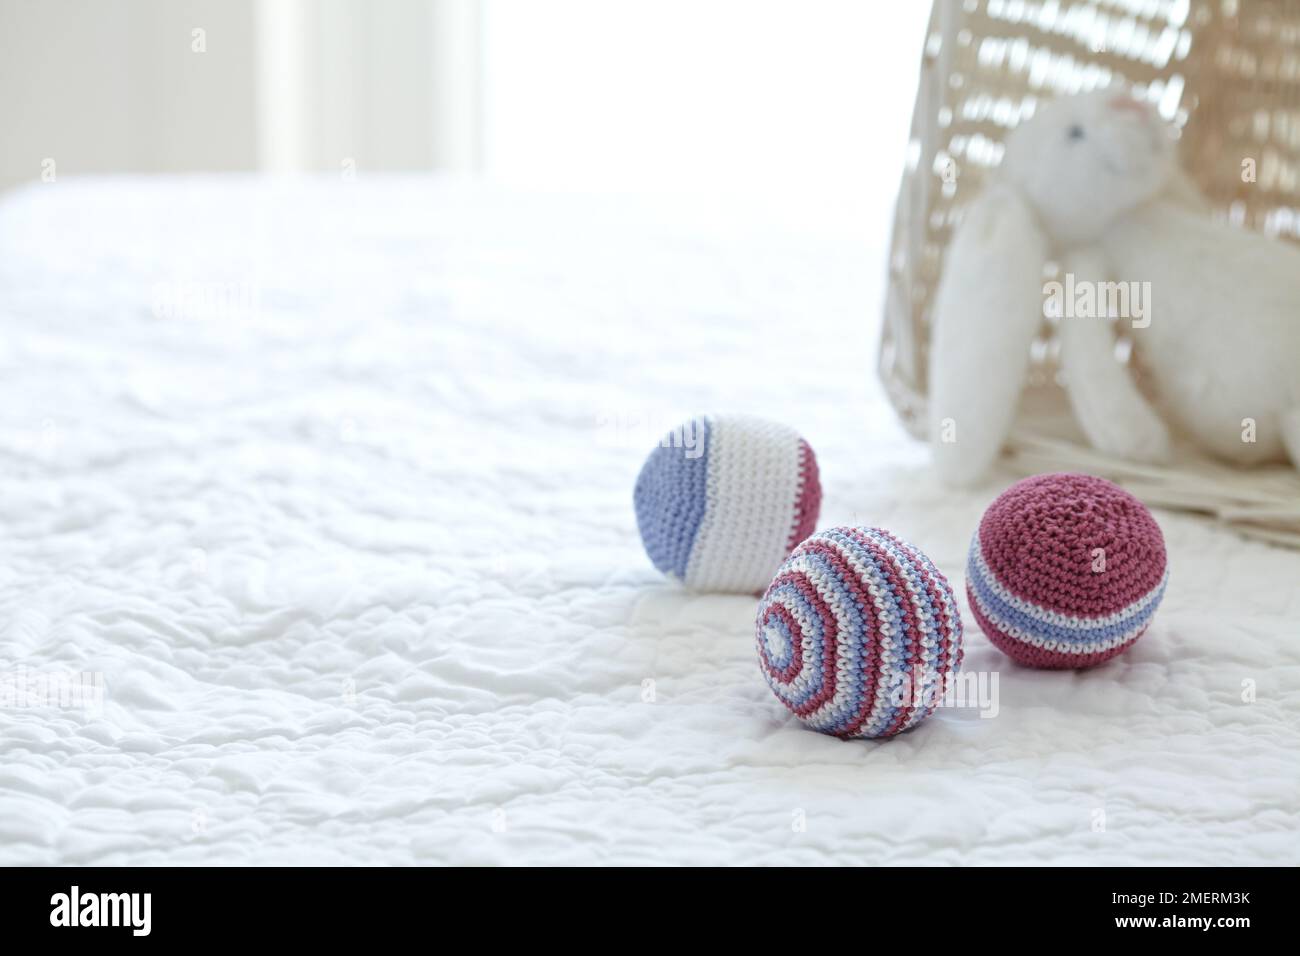 Crocheted toy balls and stuffed toy rabbit on a bed Stock Photo